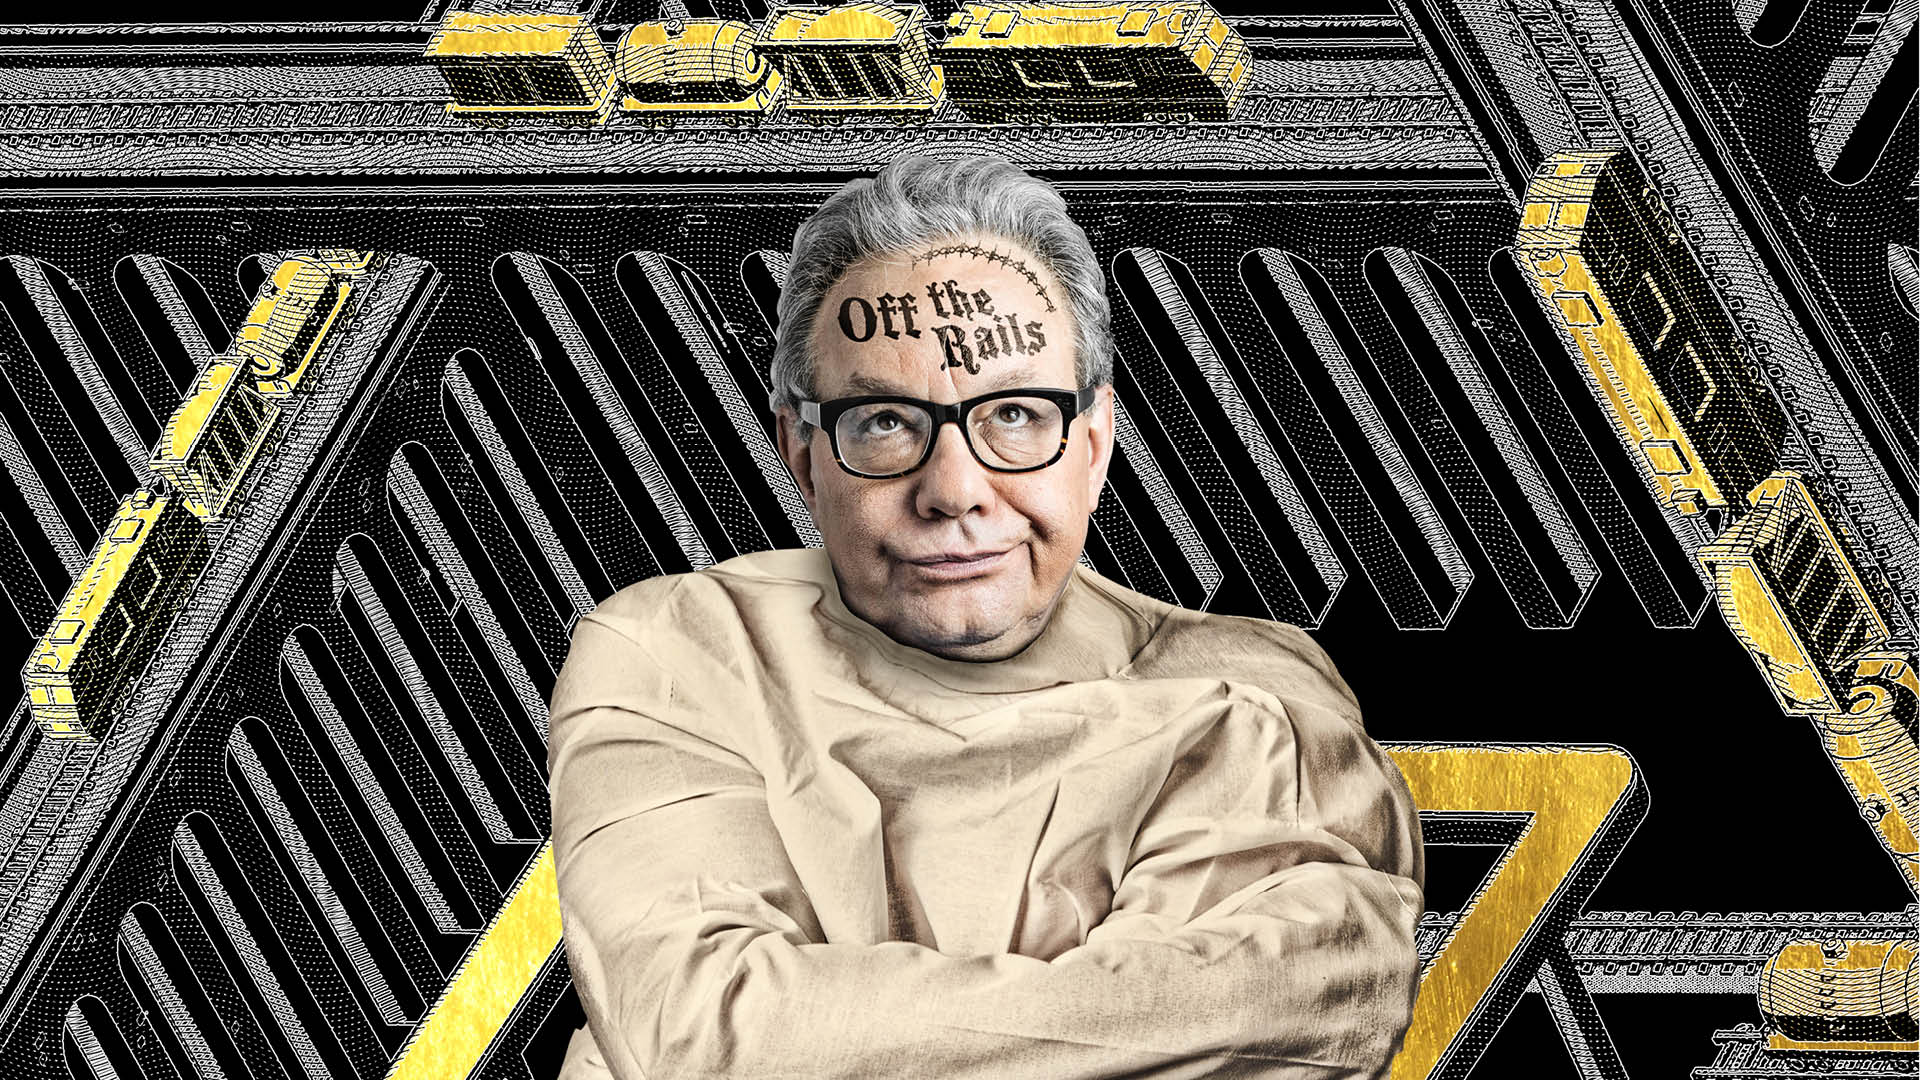 Lewis Black: OFF THE RAILS - Hanover Theatre and Conservatory